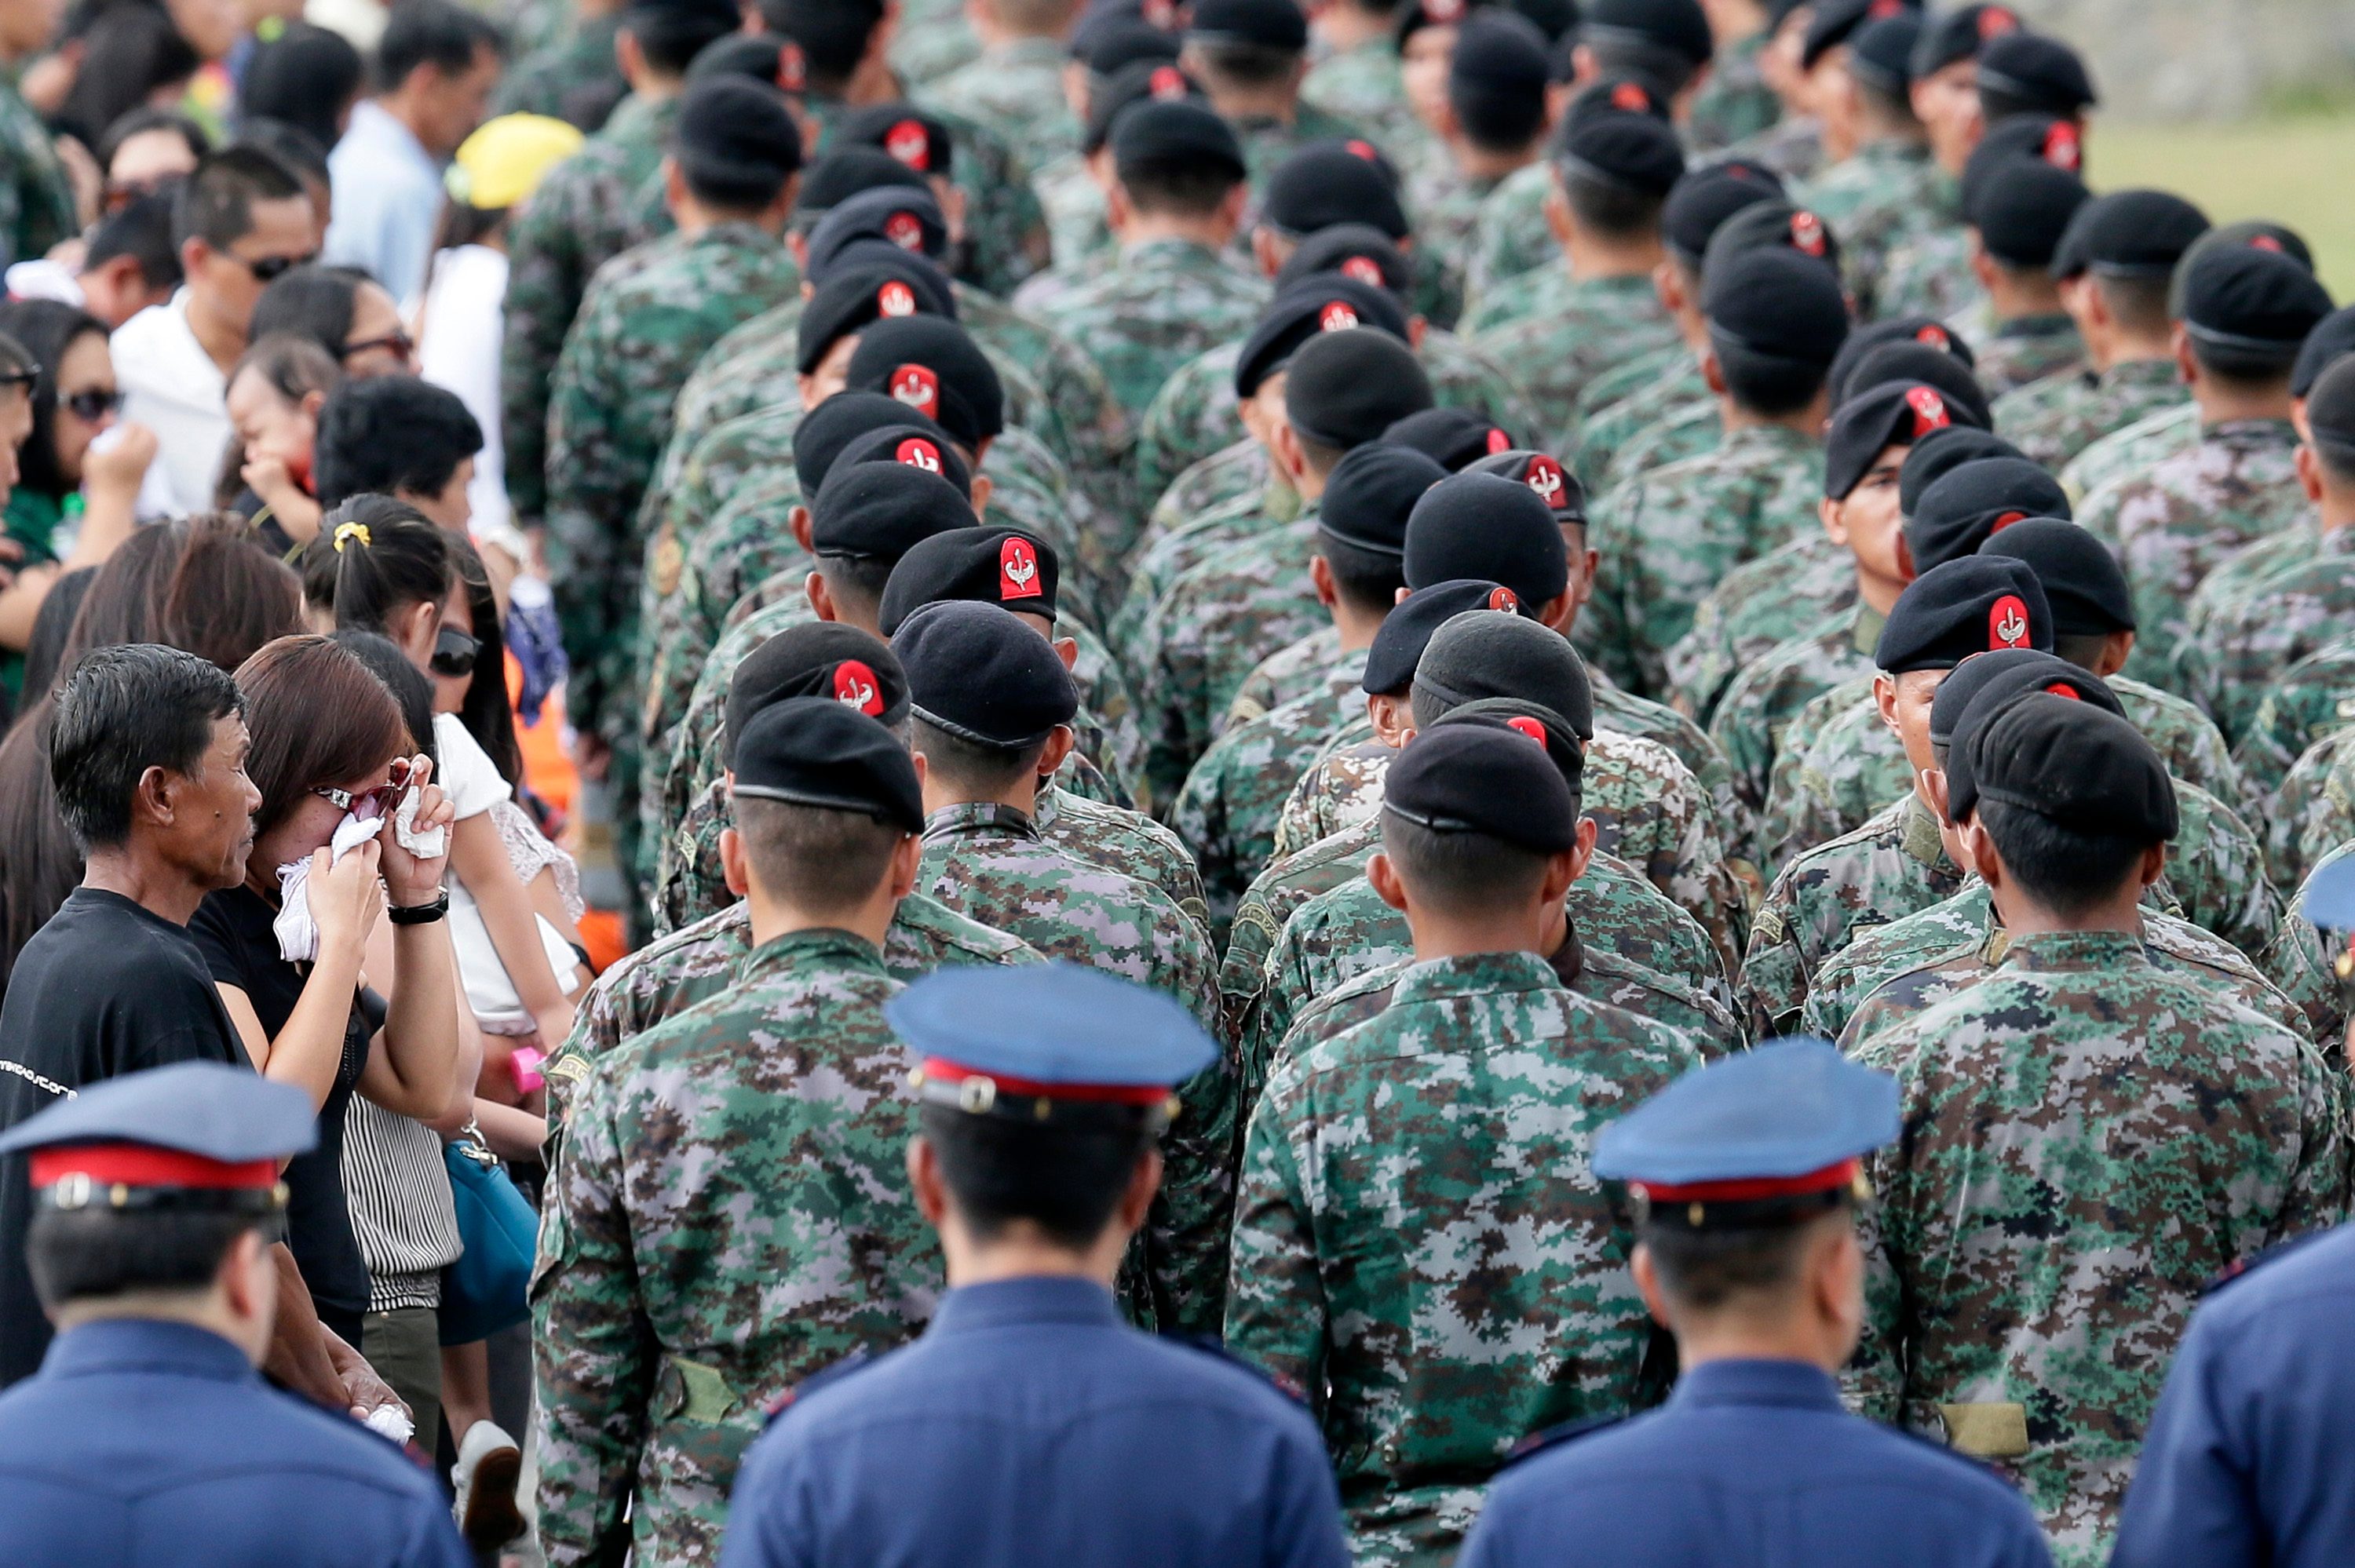 epa04592364 Relatives of killed elite Police Special Action Force pay their respect during arrival honors at Villamor Air Base, south of Manila, Philippines, 29 January 2015. Fighting between police and Muslim rebels in the southern Philippines has left at least 50 people dead, a police report said. Police were trying to arrest two suspected Jemaah Islamiyah terrorists in the town of Mamasapano in Maguindanao province, 960 kilometres south of Manila, when the clash erupted. The rebels belonged to the Moro Islamic Liberation Front (MILF), which signed a peace deal with the government in March, and to its breakaway faction the Bangsamoro Islamic Freedom Fighters, which opposed the agreement. EPA/DENNIS M. SABANGAN 